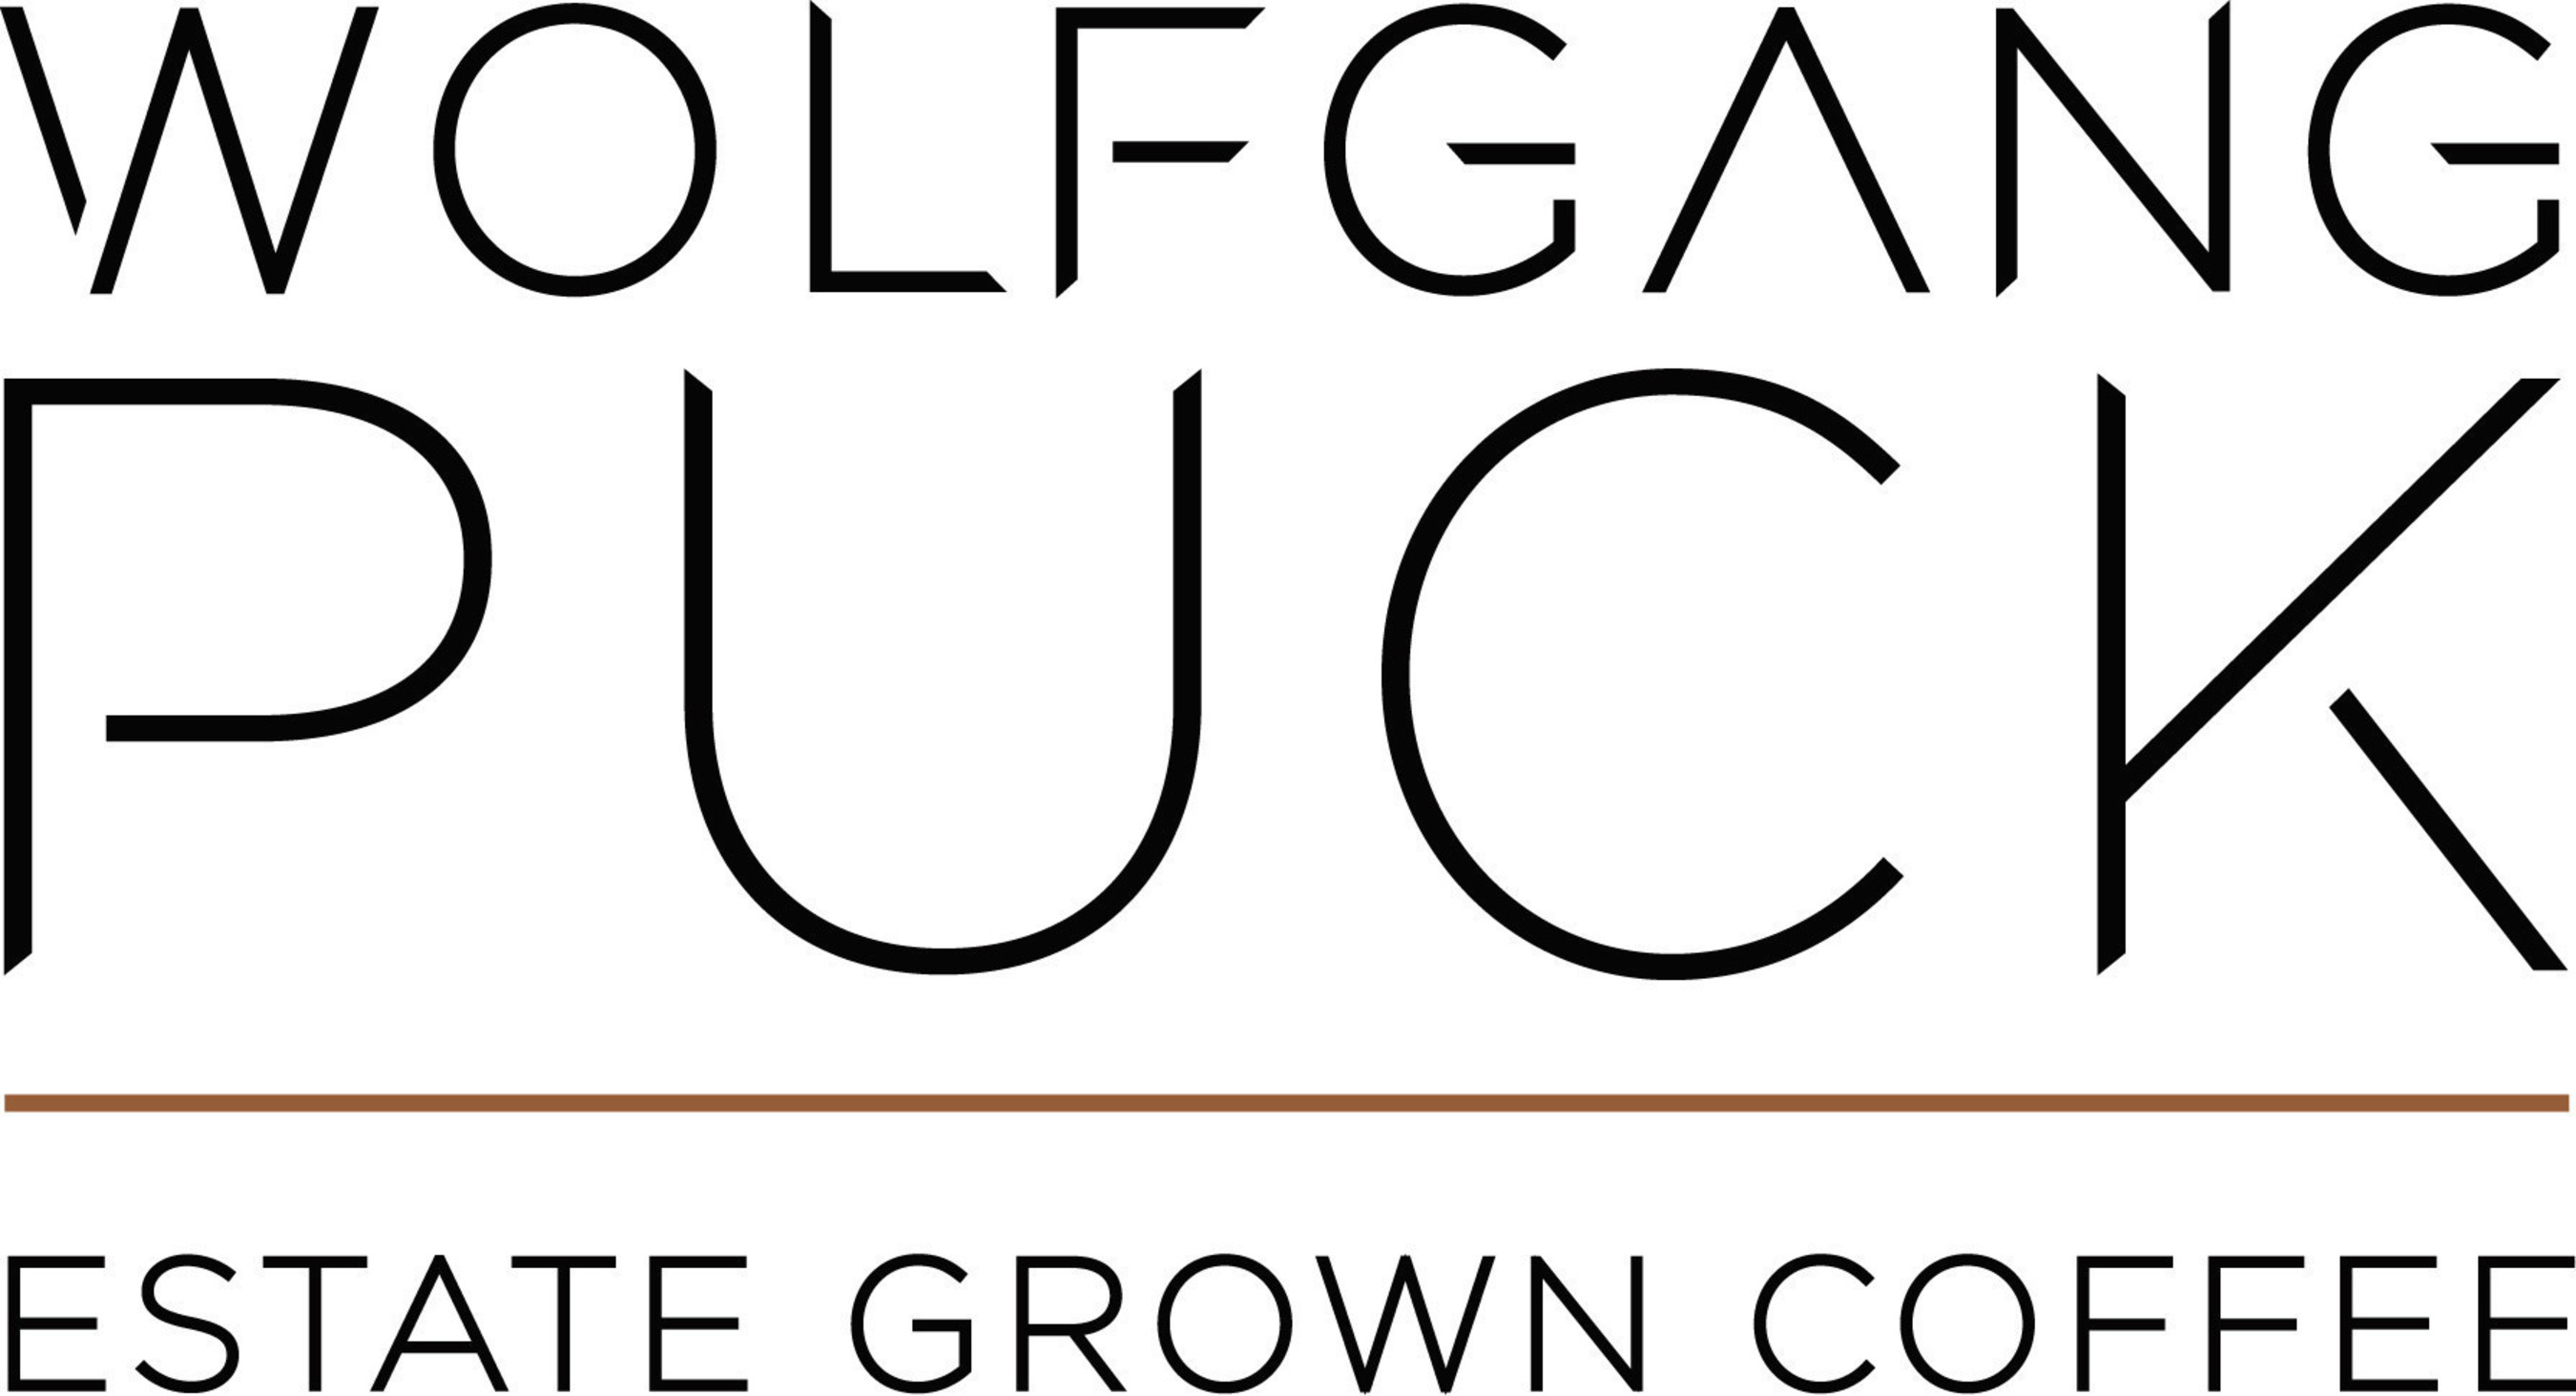 Wolfgang Puck Coffee is Creating a Healthier Environment! Wolfgang Puck will Transition to Sustainable EcoCup(TM) Single Serve Capsules - compatible with Keurig(R) Brewers